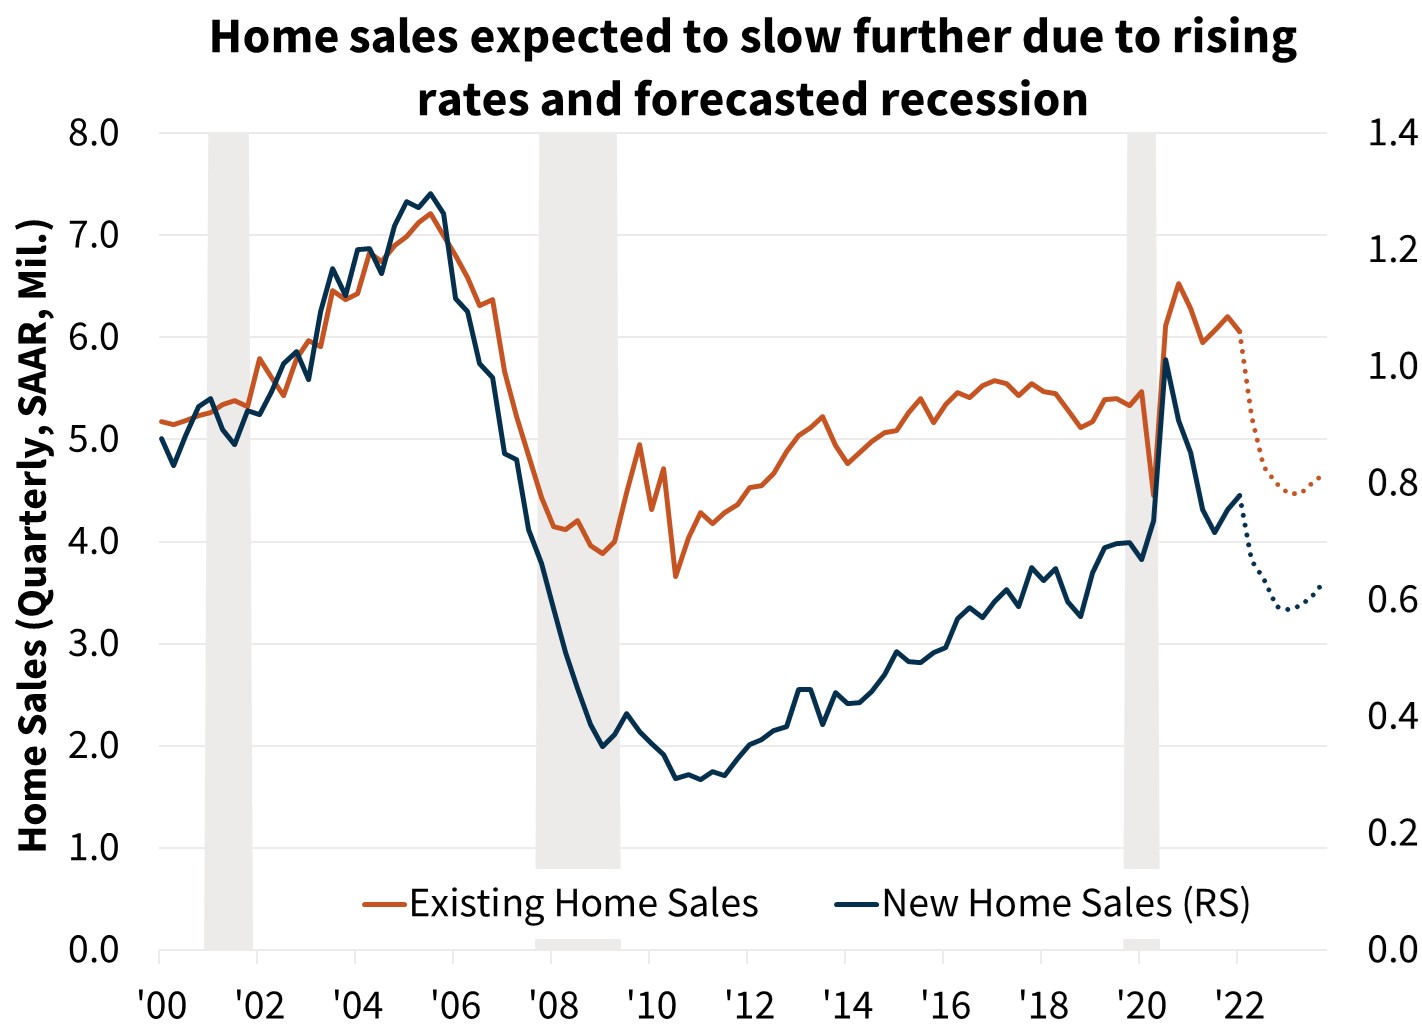 Home sales expected to slow further due to rising rates and forecasted recession